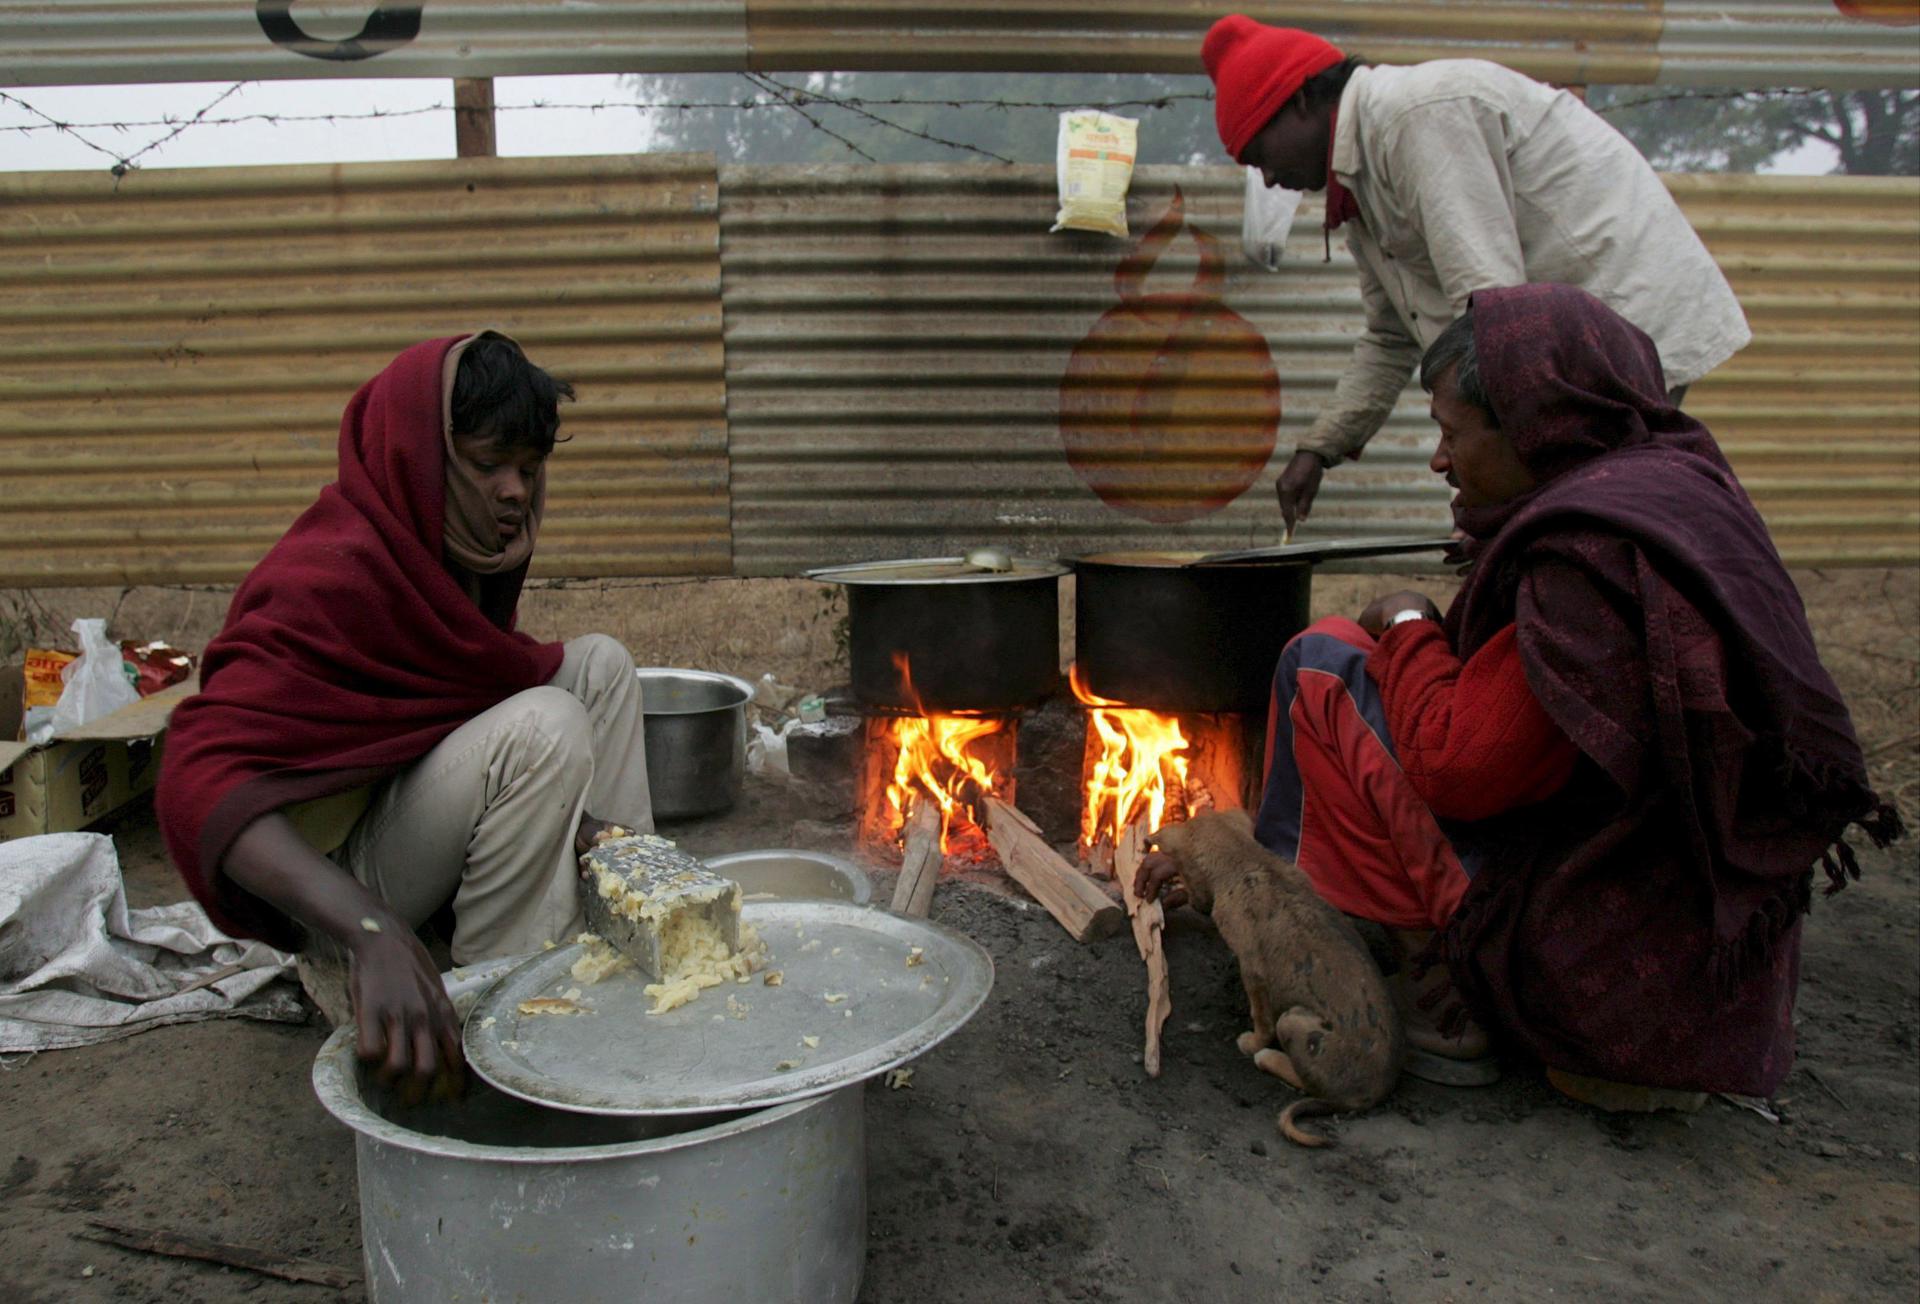 A file photo from Gurgaon, a suburb of New Delhi, India, shows Indian men trying to warm up during a cold and cloudy morning  on January 7, 2008. Religious violence in Gurgaon and a nearby region has claimed five lives. EFE/ MONEY SHARRMA